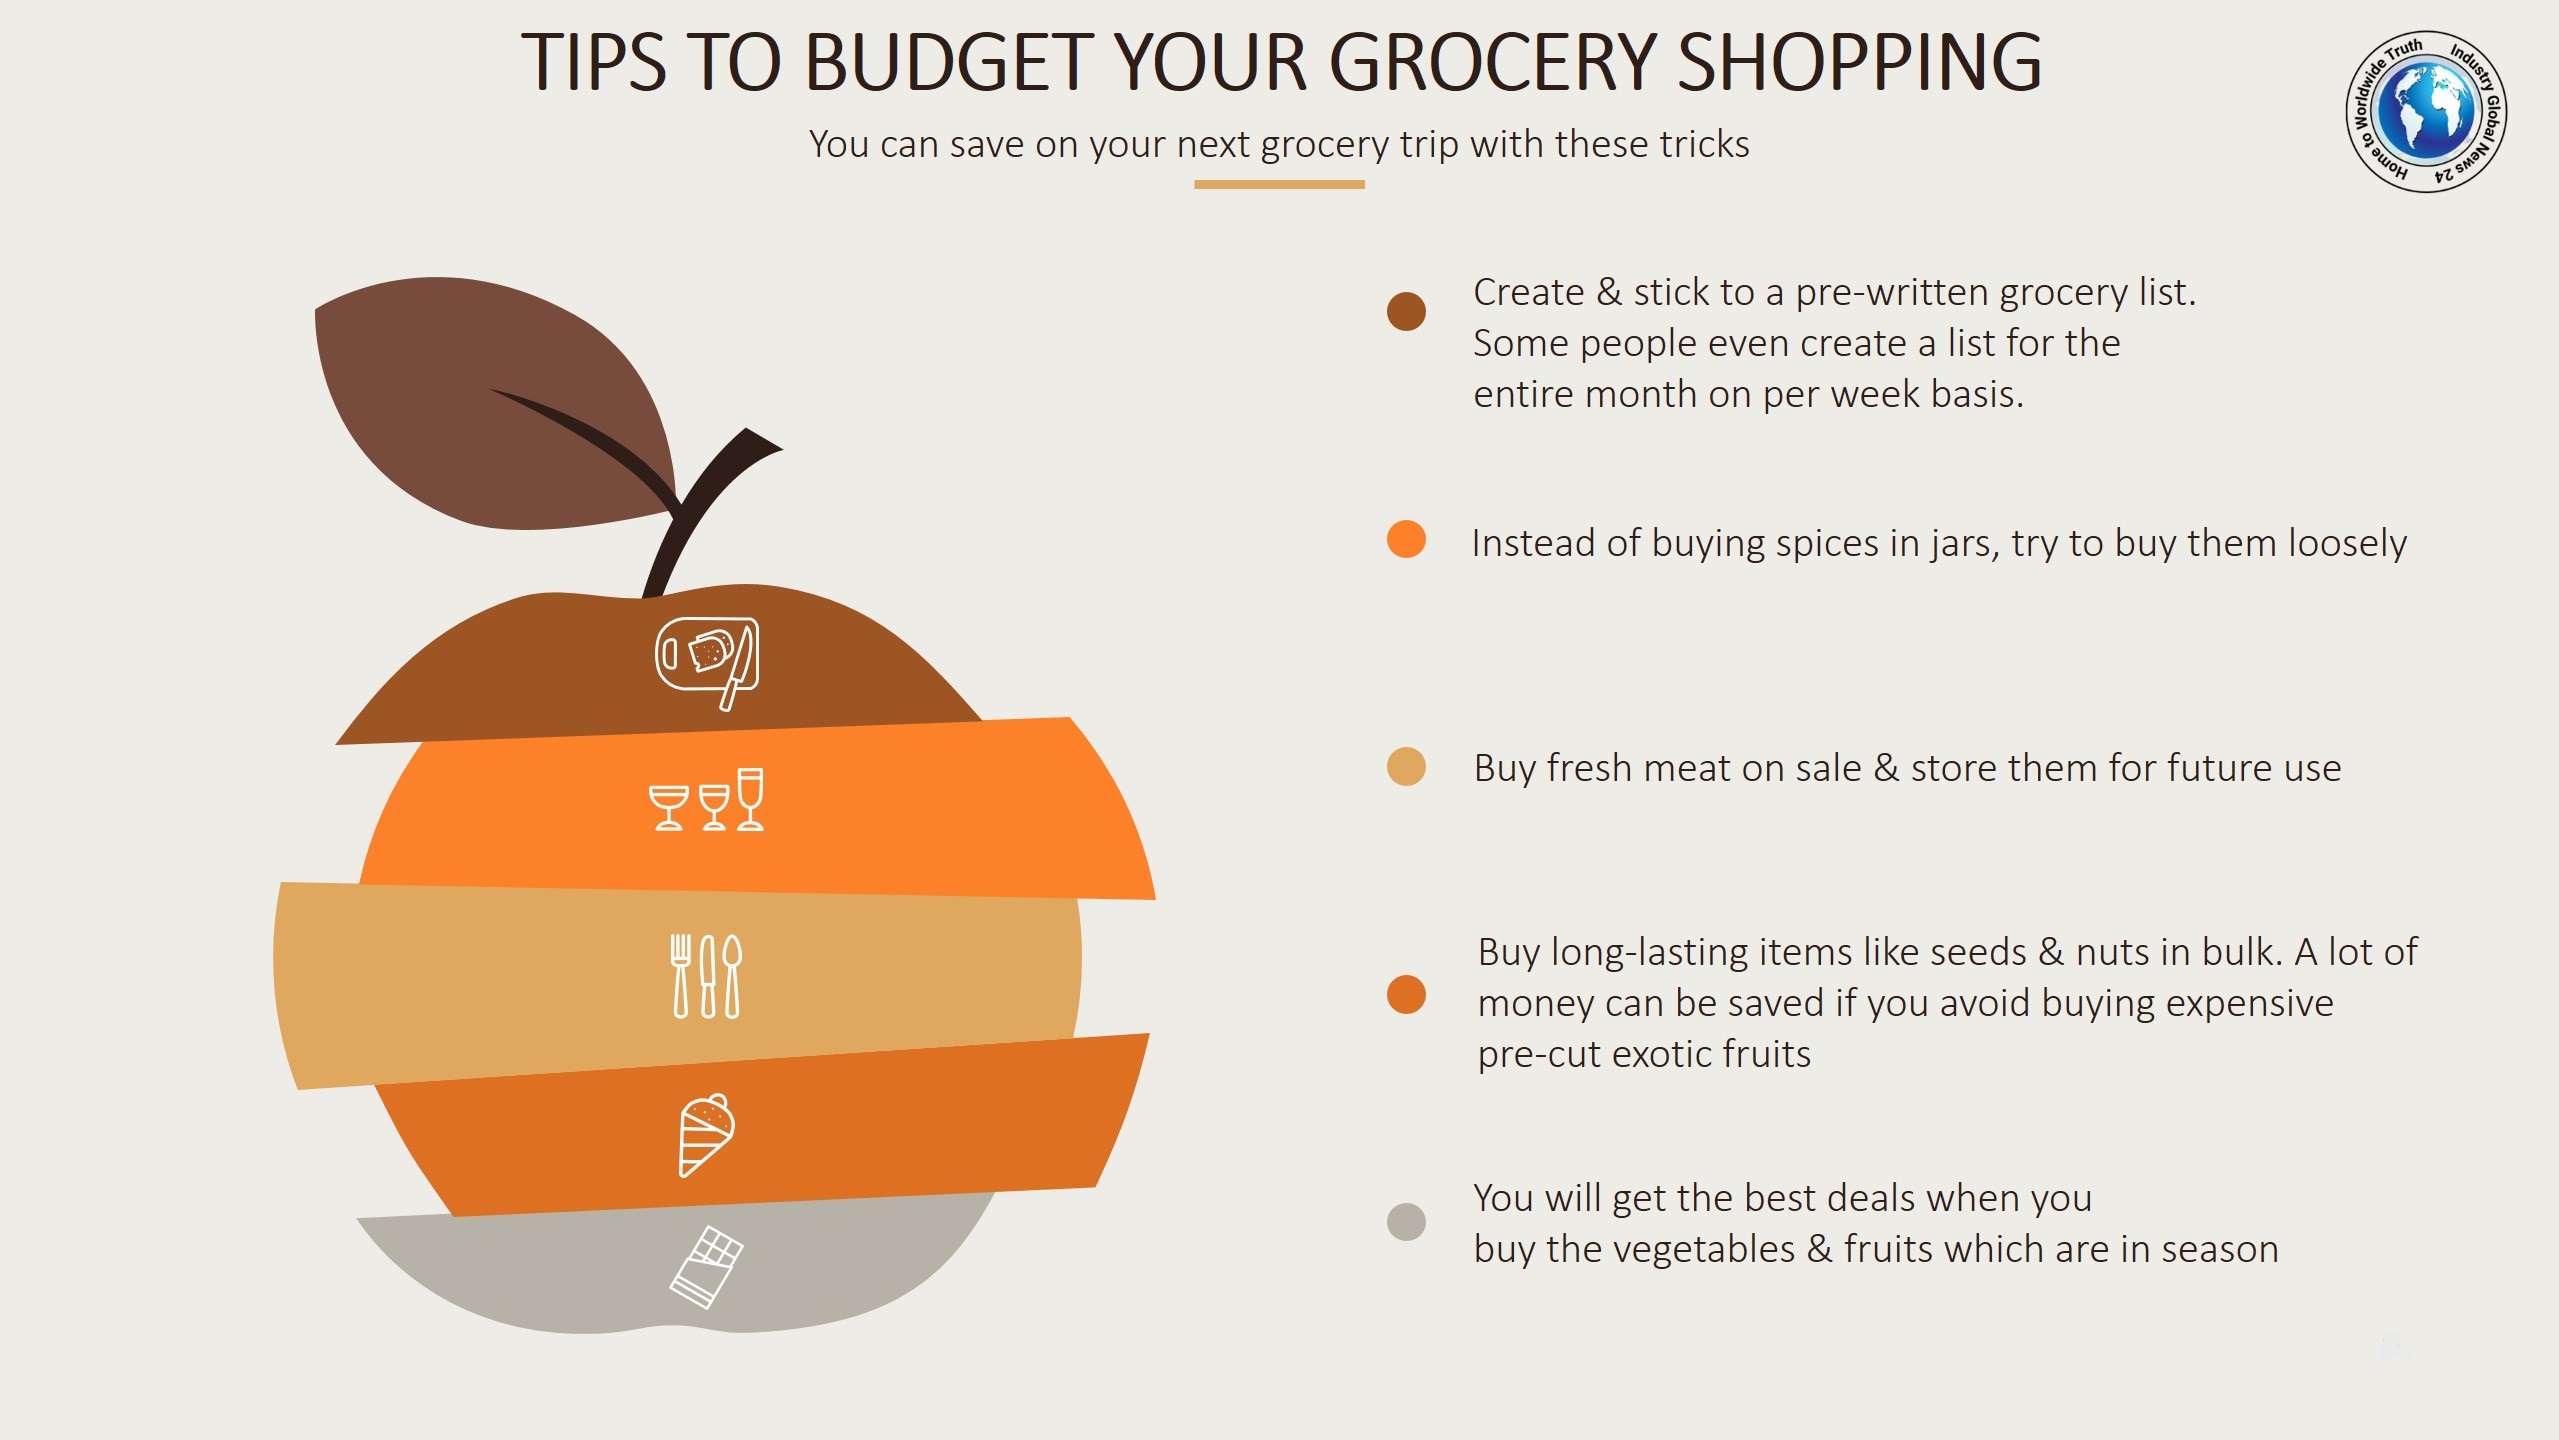 Tips to budget your grocery shopping